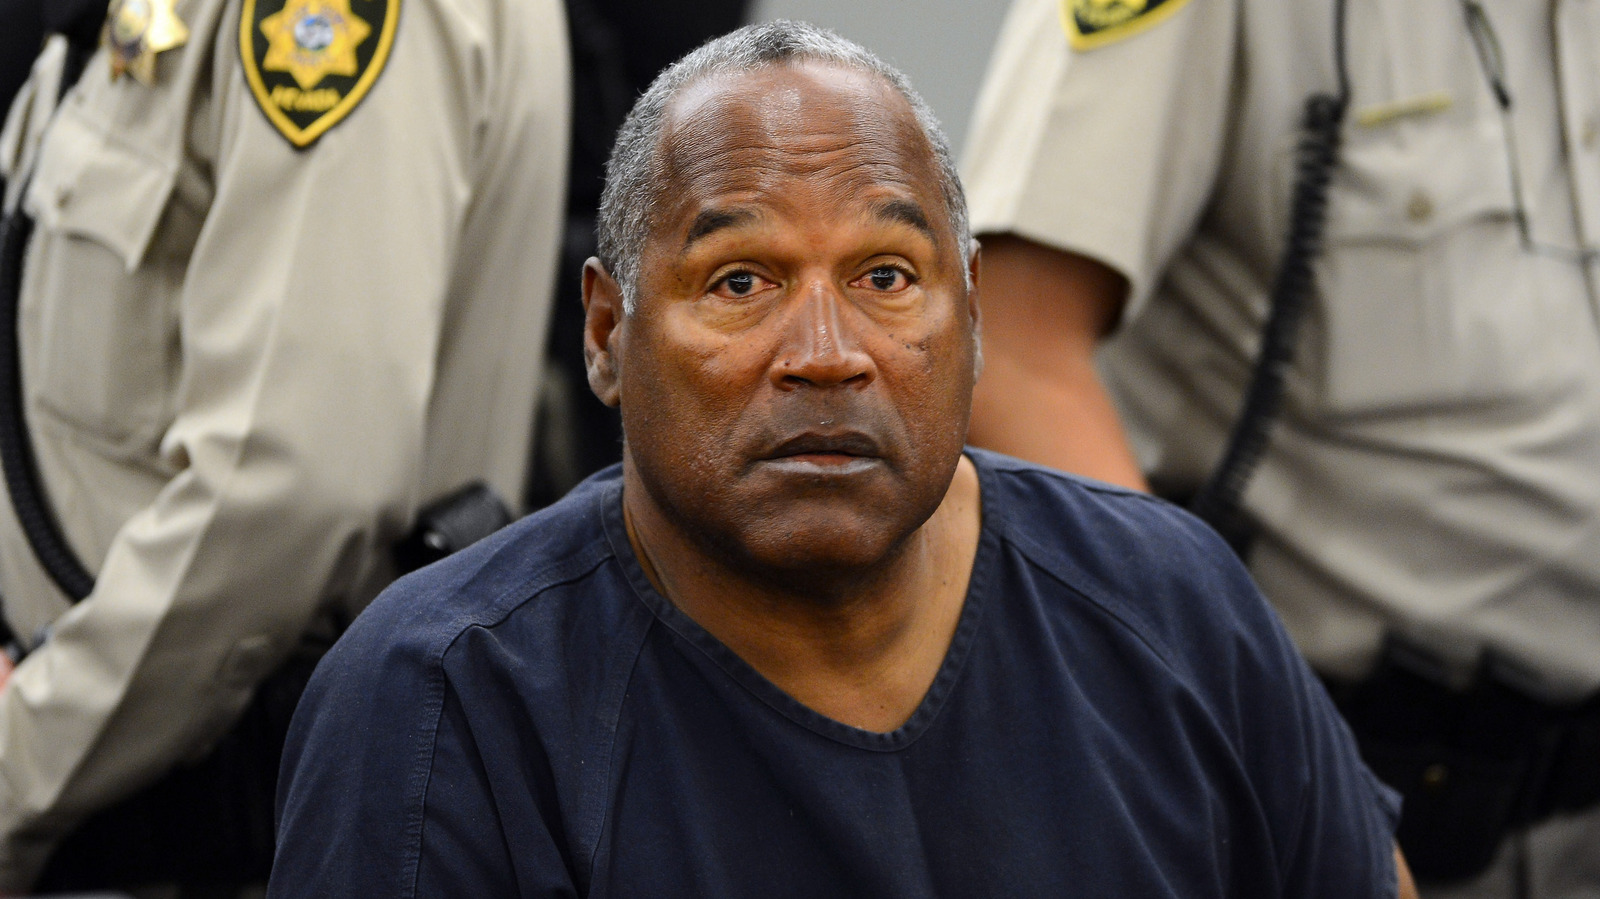 Body Language Expert Tells Us O.J. Simpson’s Claims About His Health In This Video Raised Red Flags